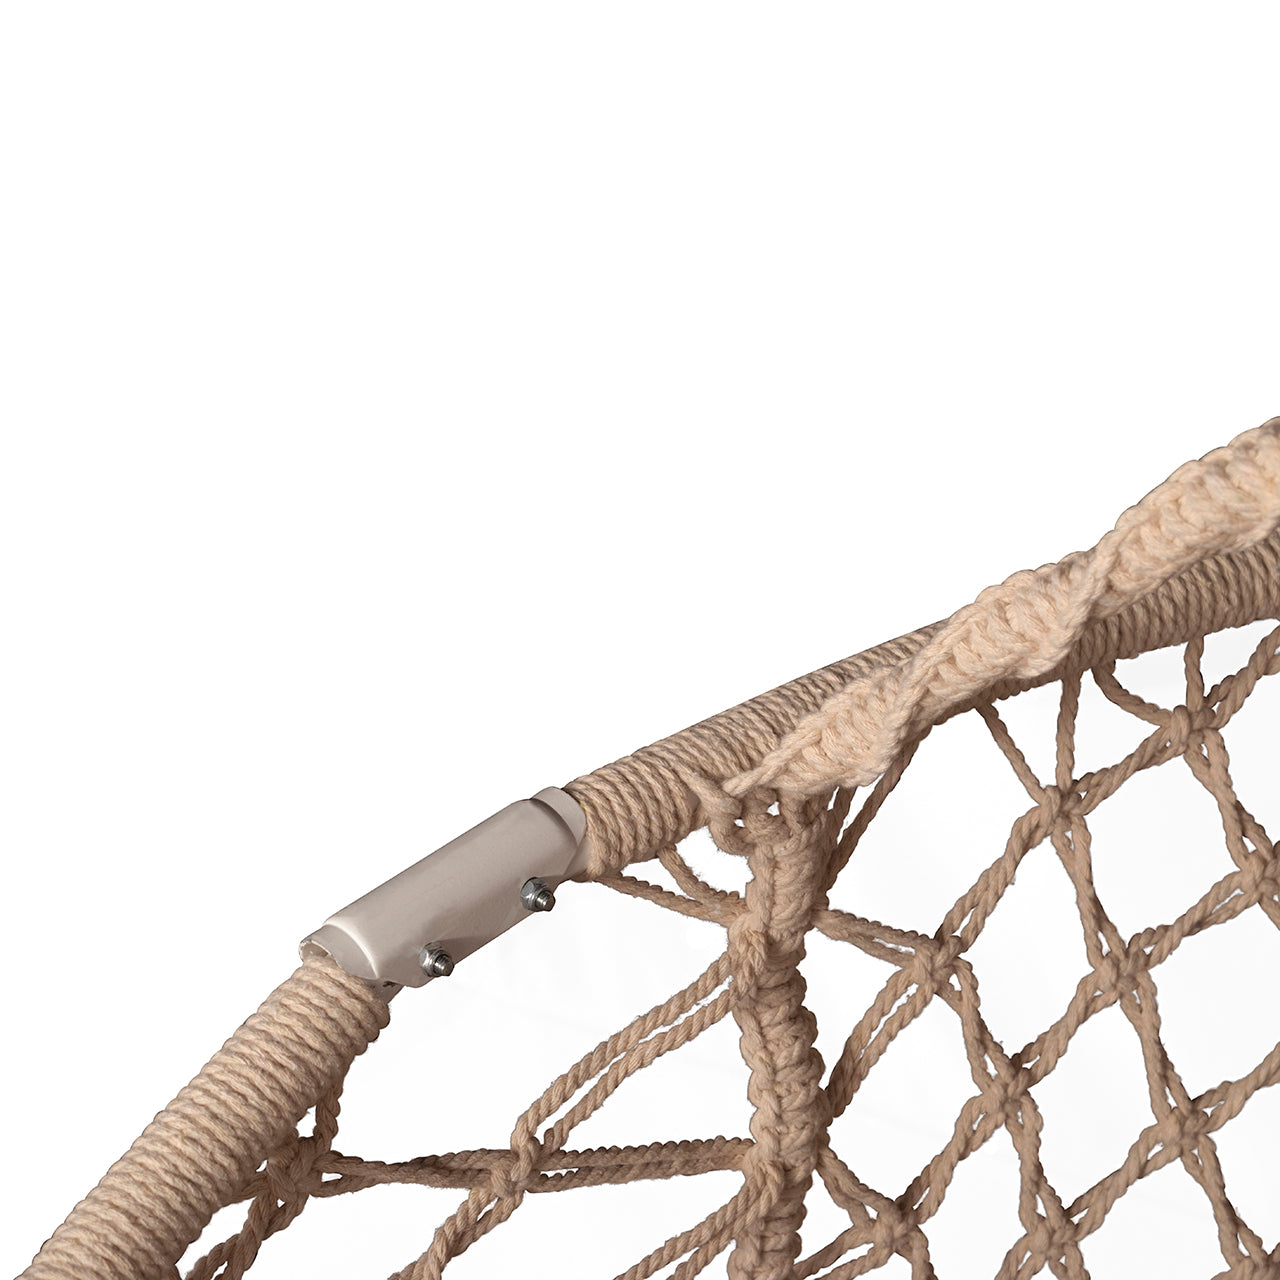 Close-up of the frame for the Bliss Hammocks 55-inch 2 Person Bohemian Style Macramé Swing Chair with Pillows.